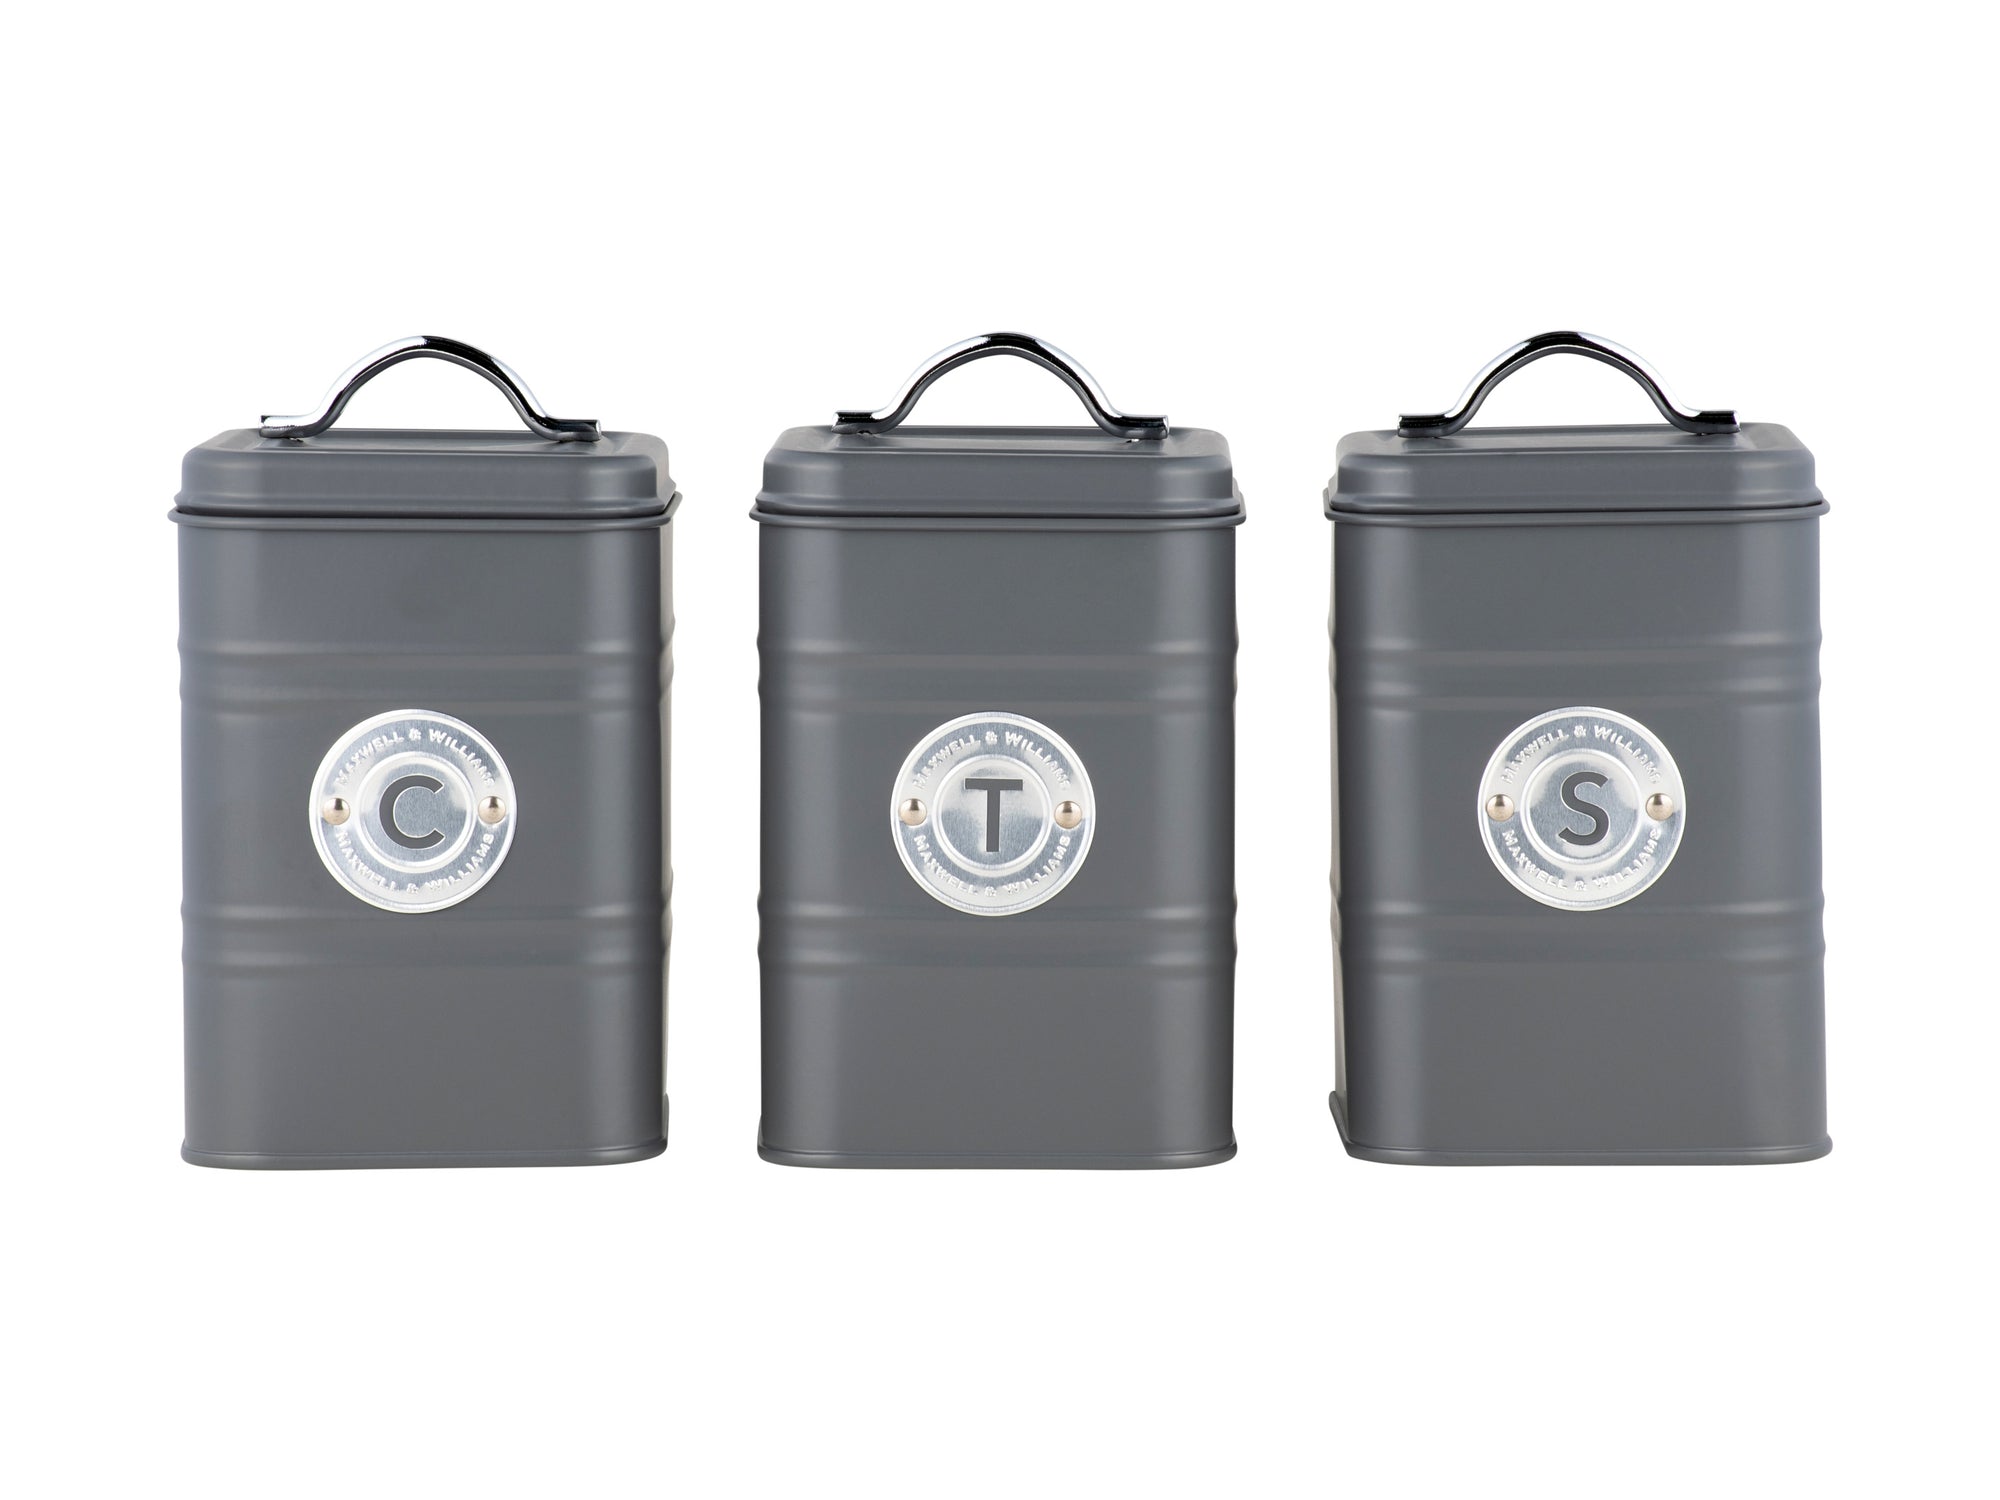 Canister set of 3 Grantham- Charcoal